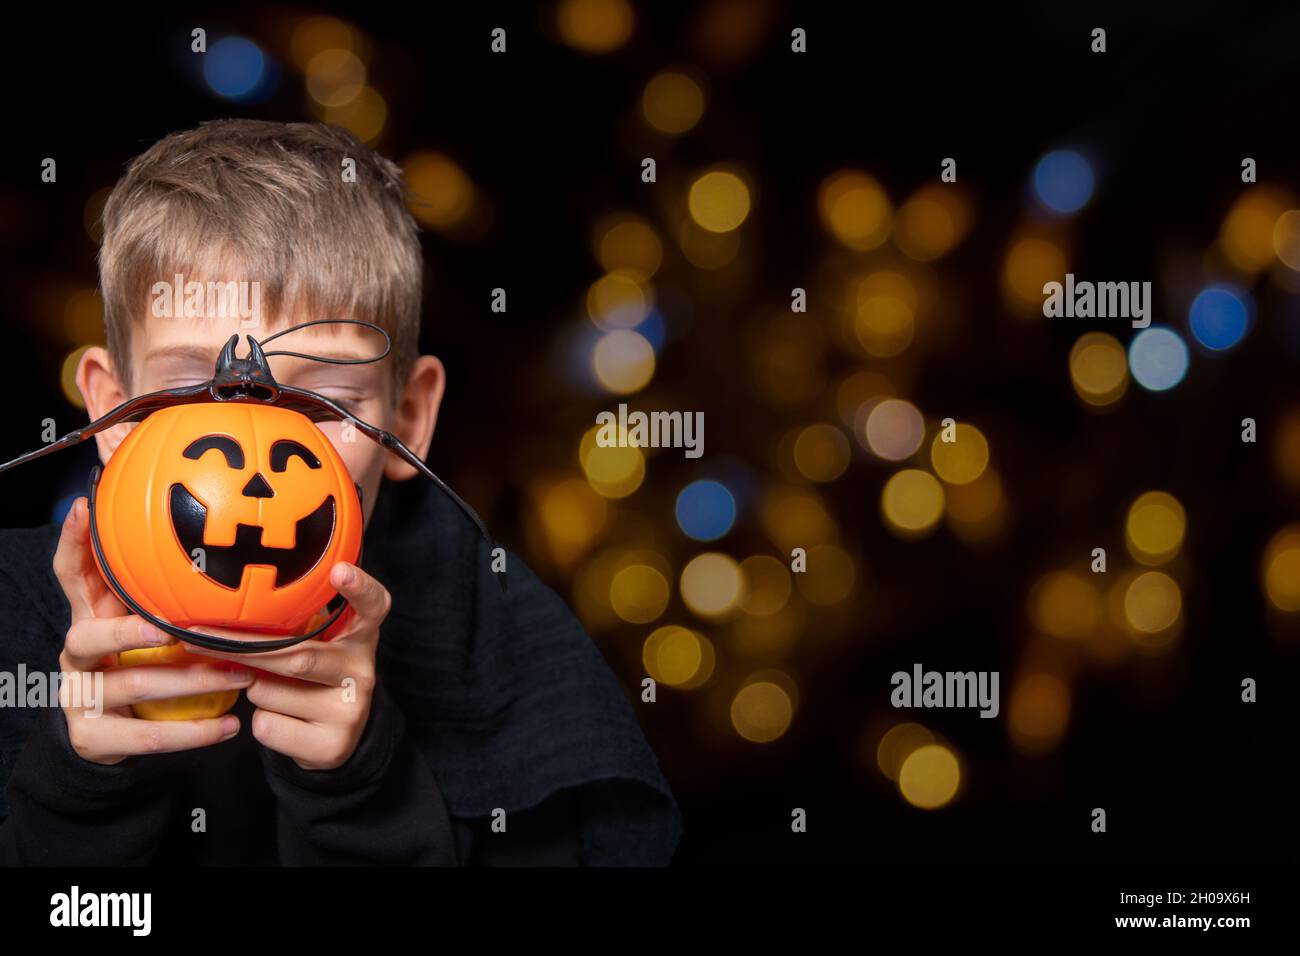 A child holding an orange pumpkin-shaped basket with a grinning face, Jack's lantern and a bat on a black background with bokeh. The boy is waiting fo Stock Photo